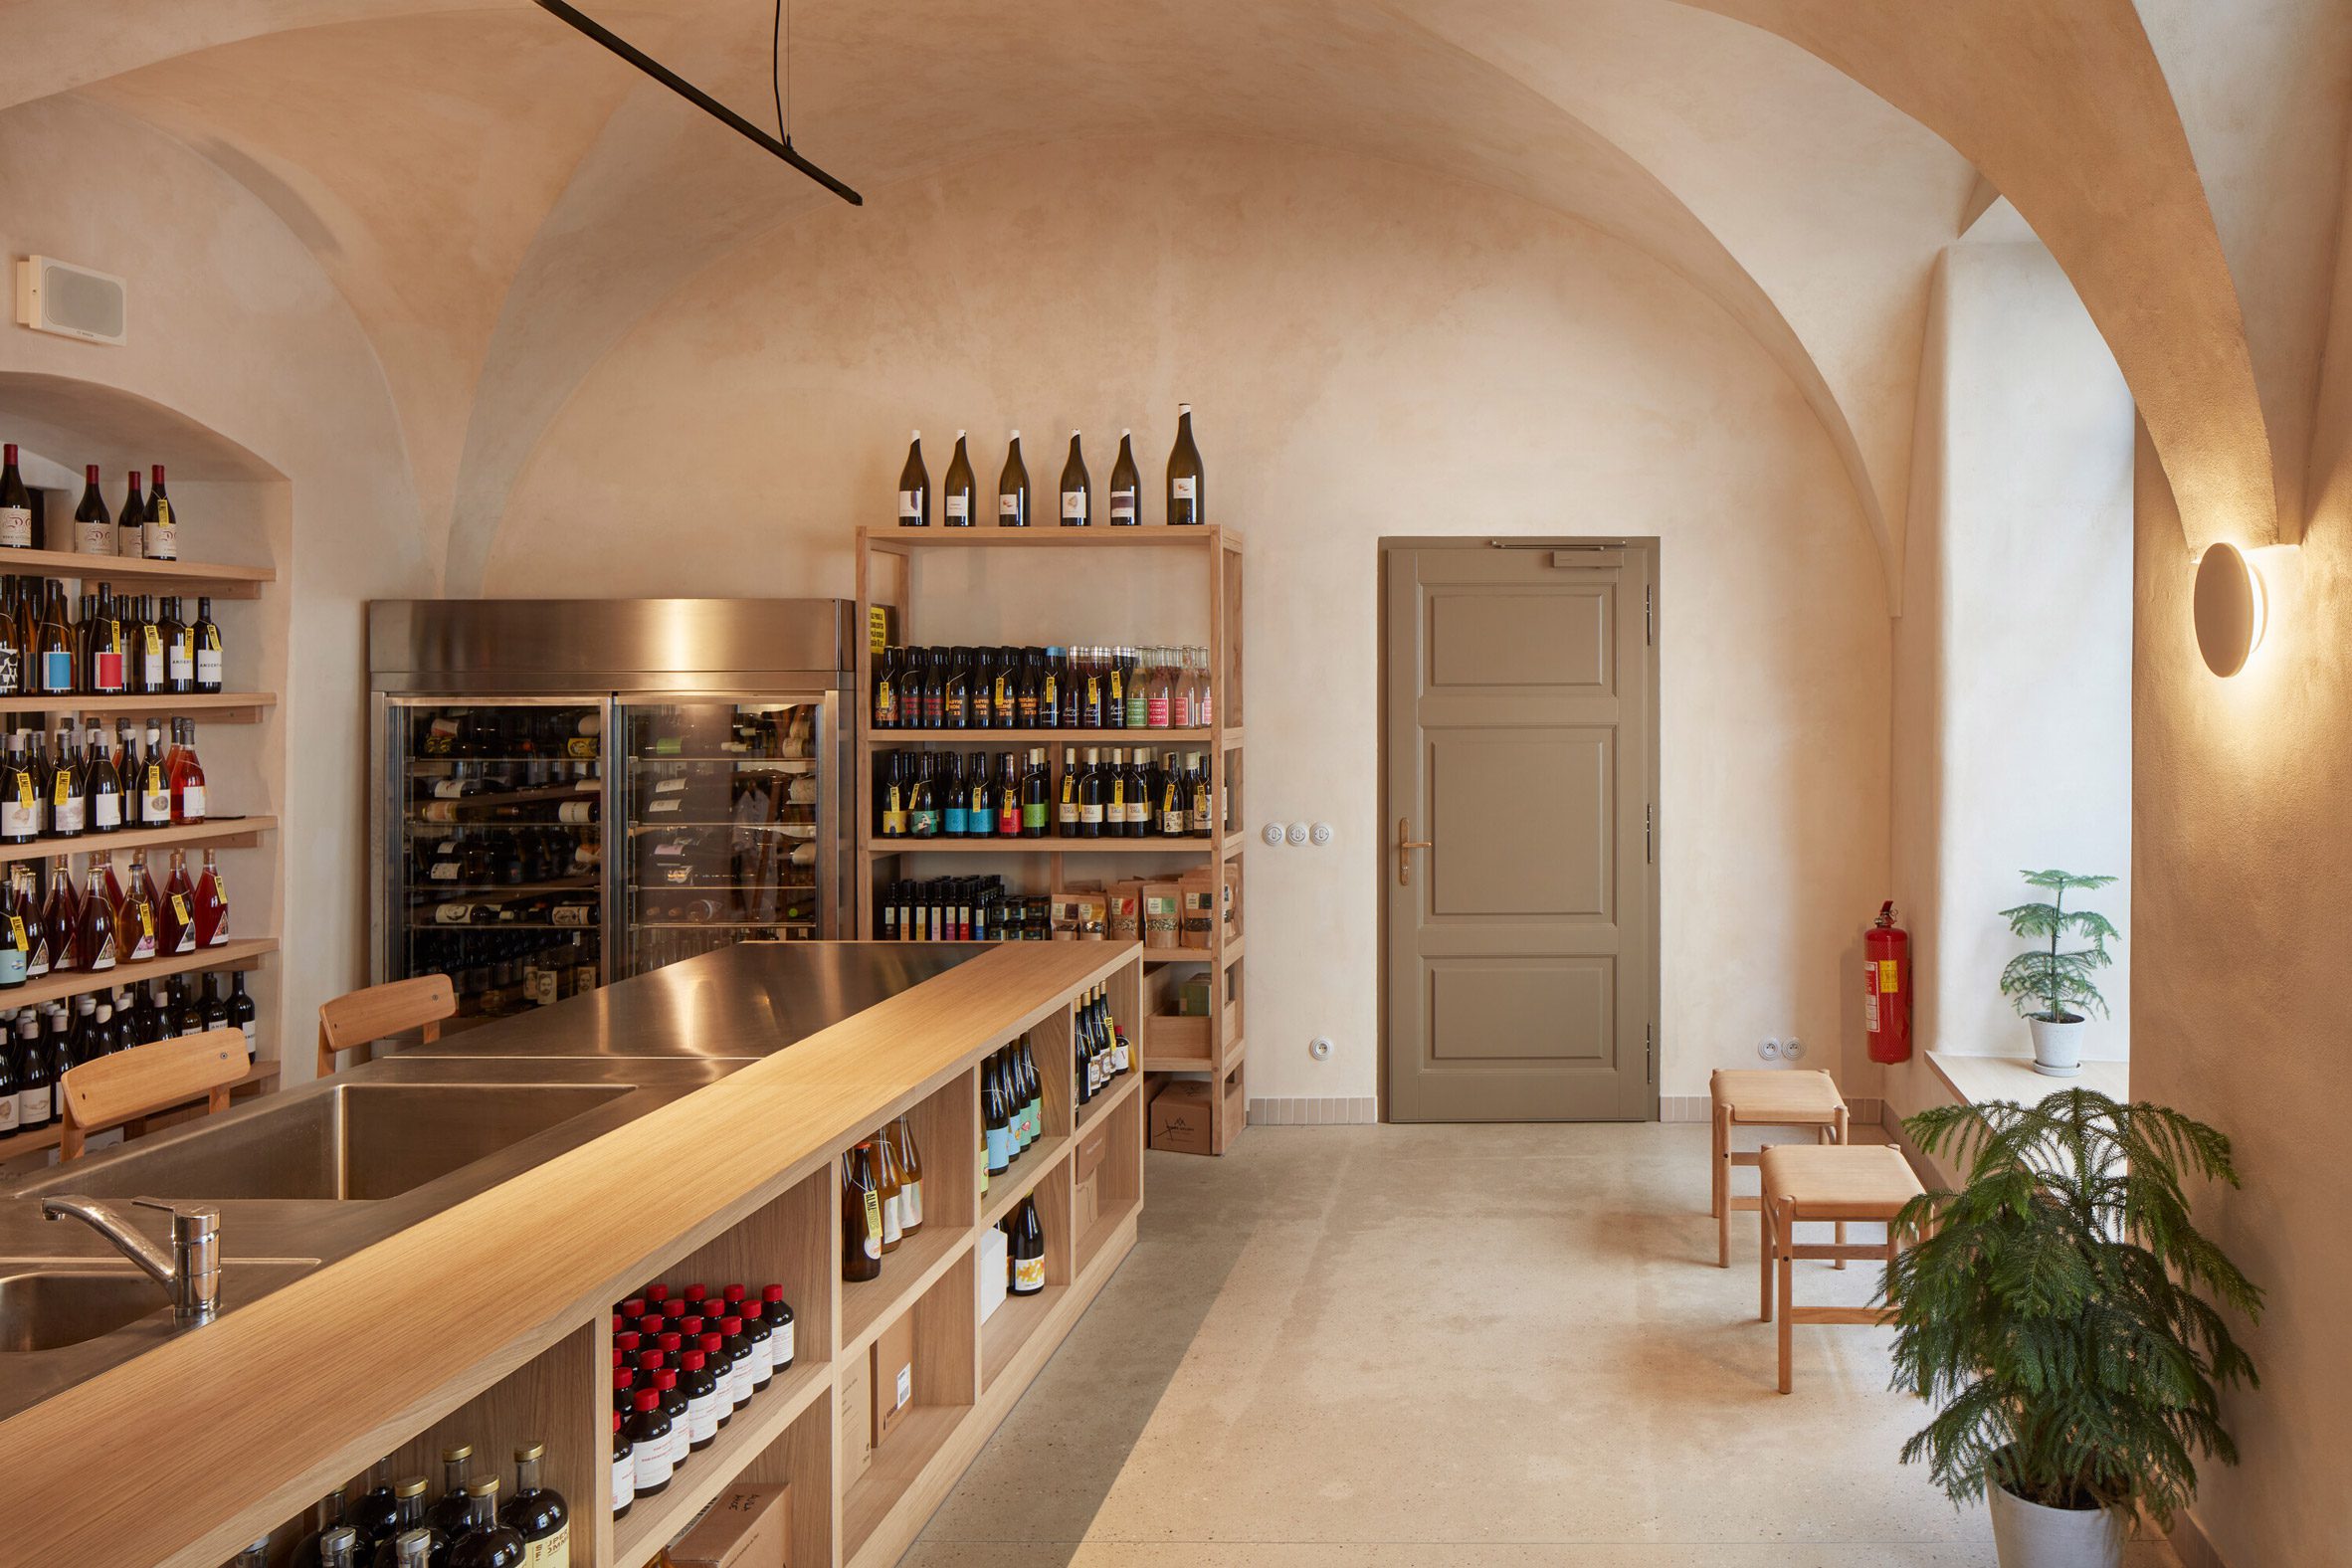 Wine shop interior with vaulted ceilings